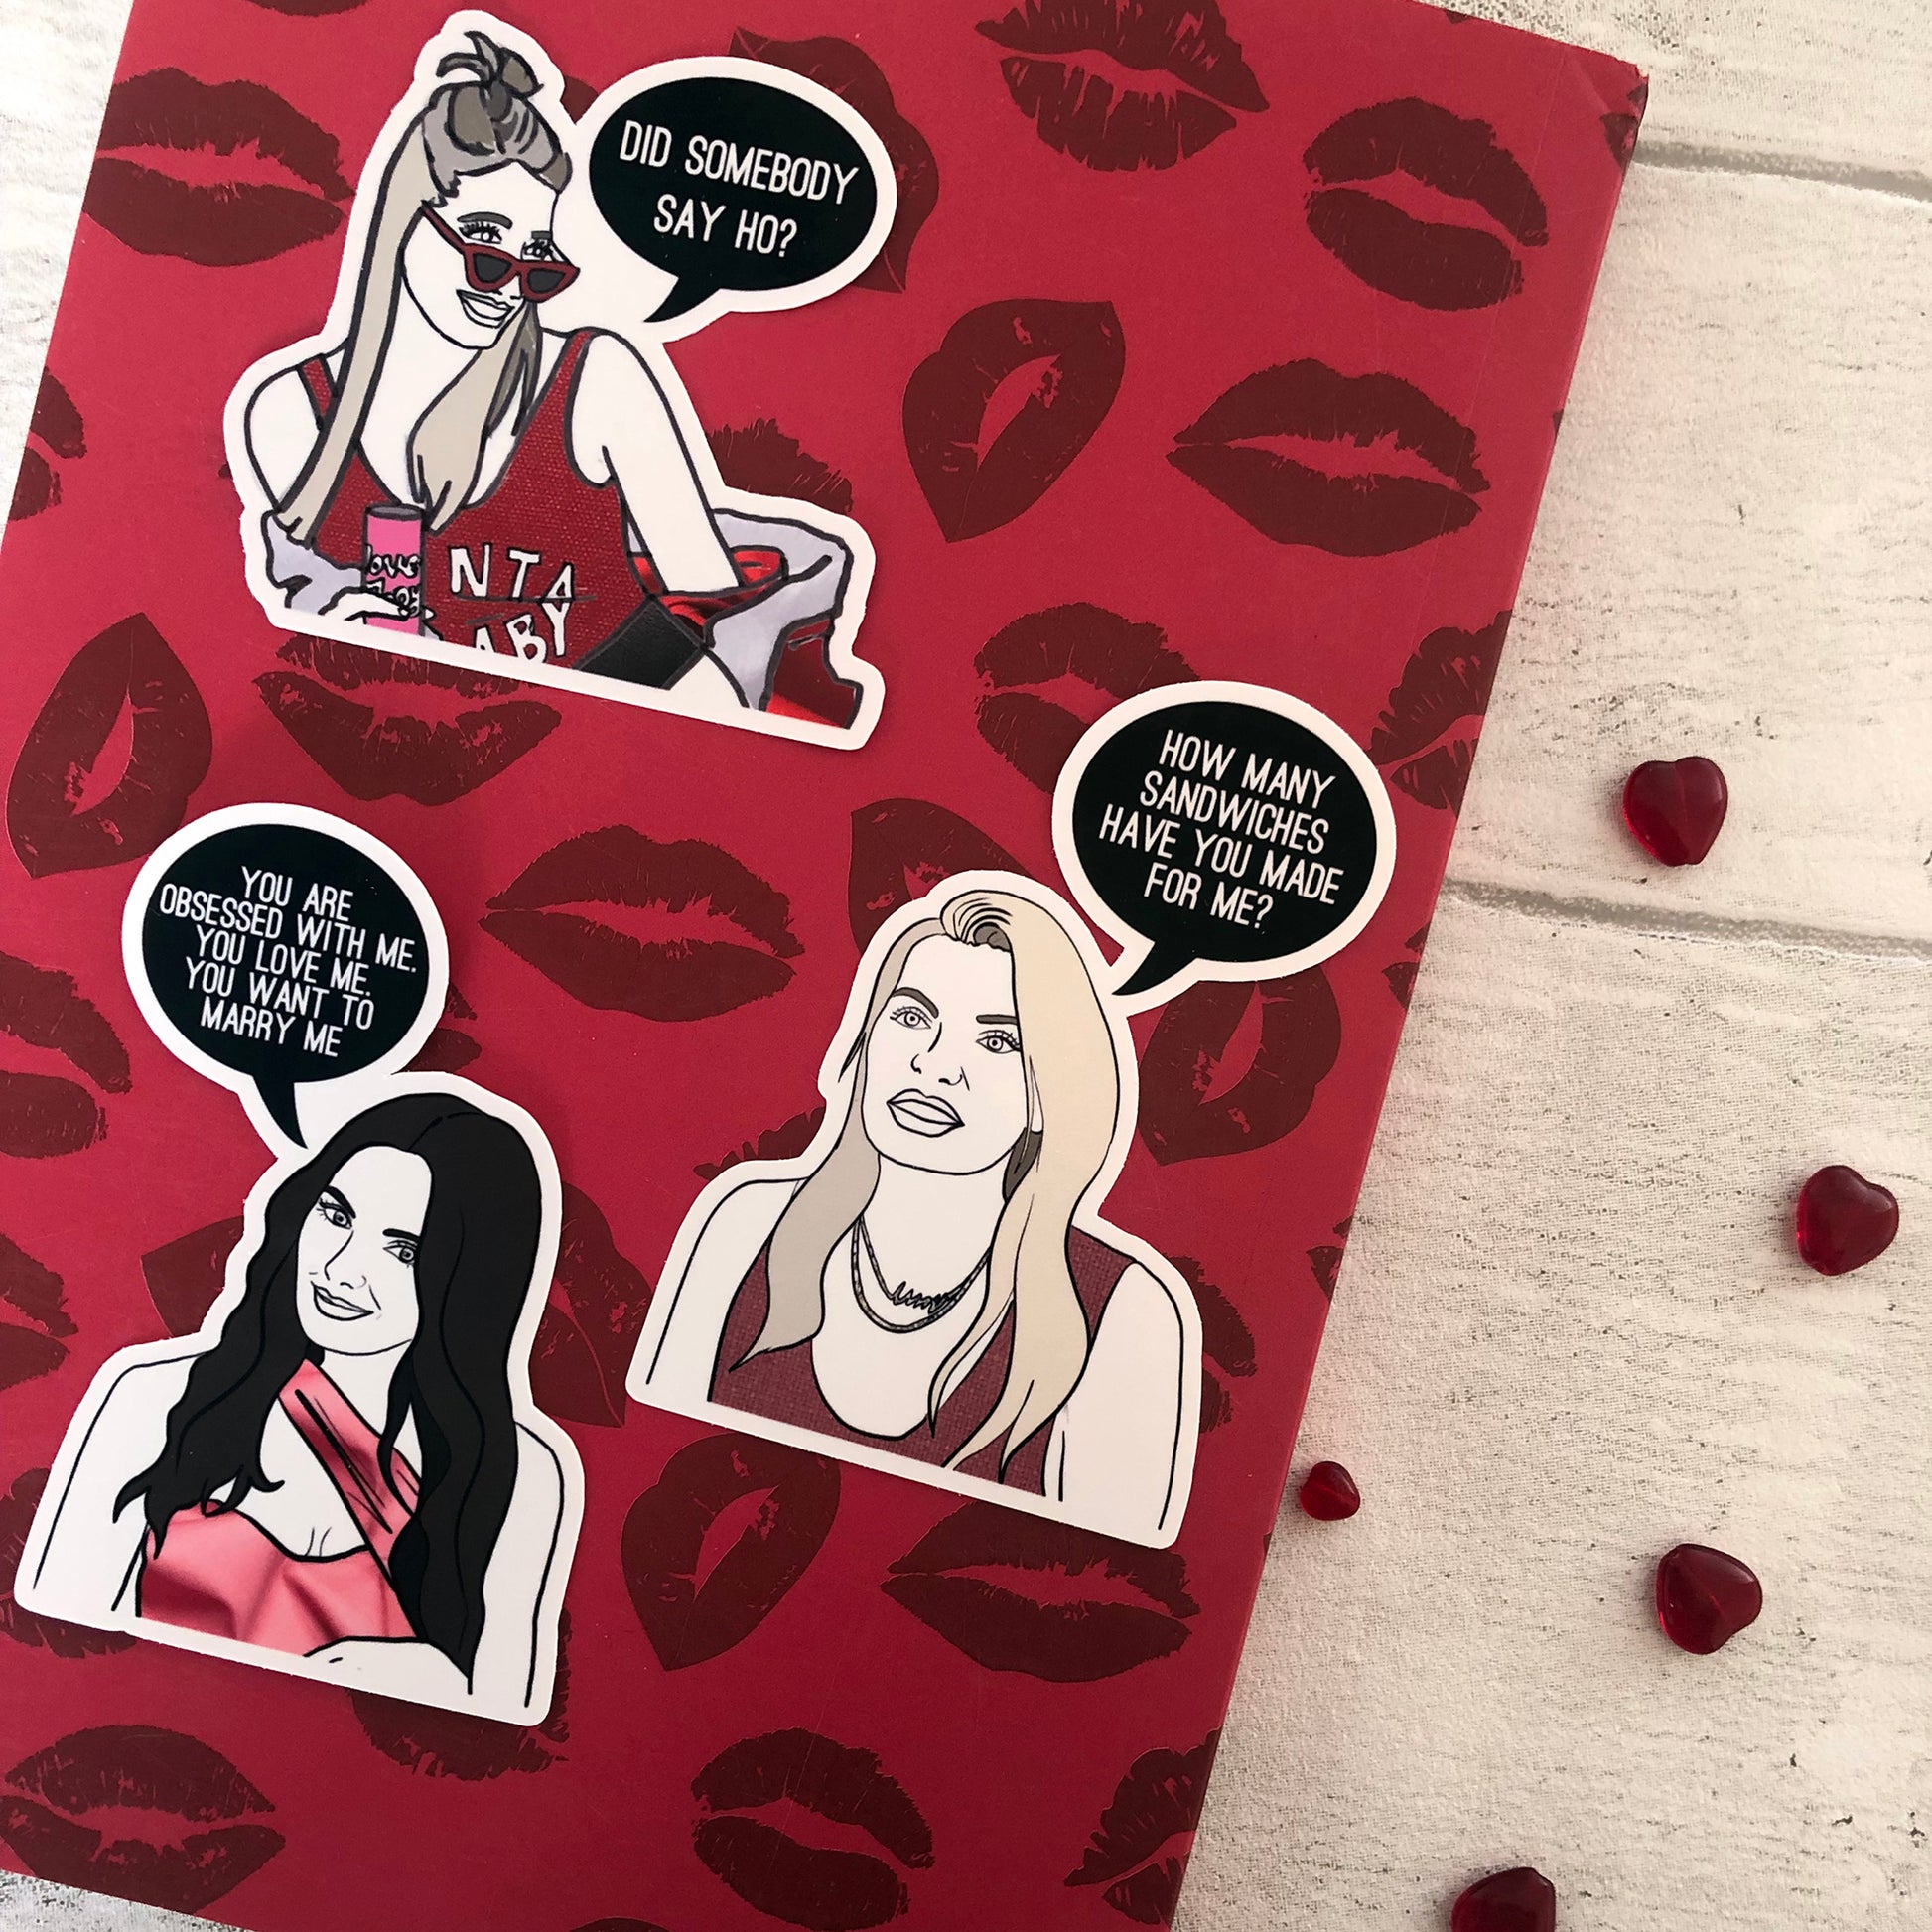 Image shows a collection of stickers inspired by reality tv show Summer House